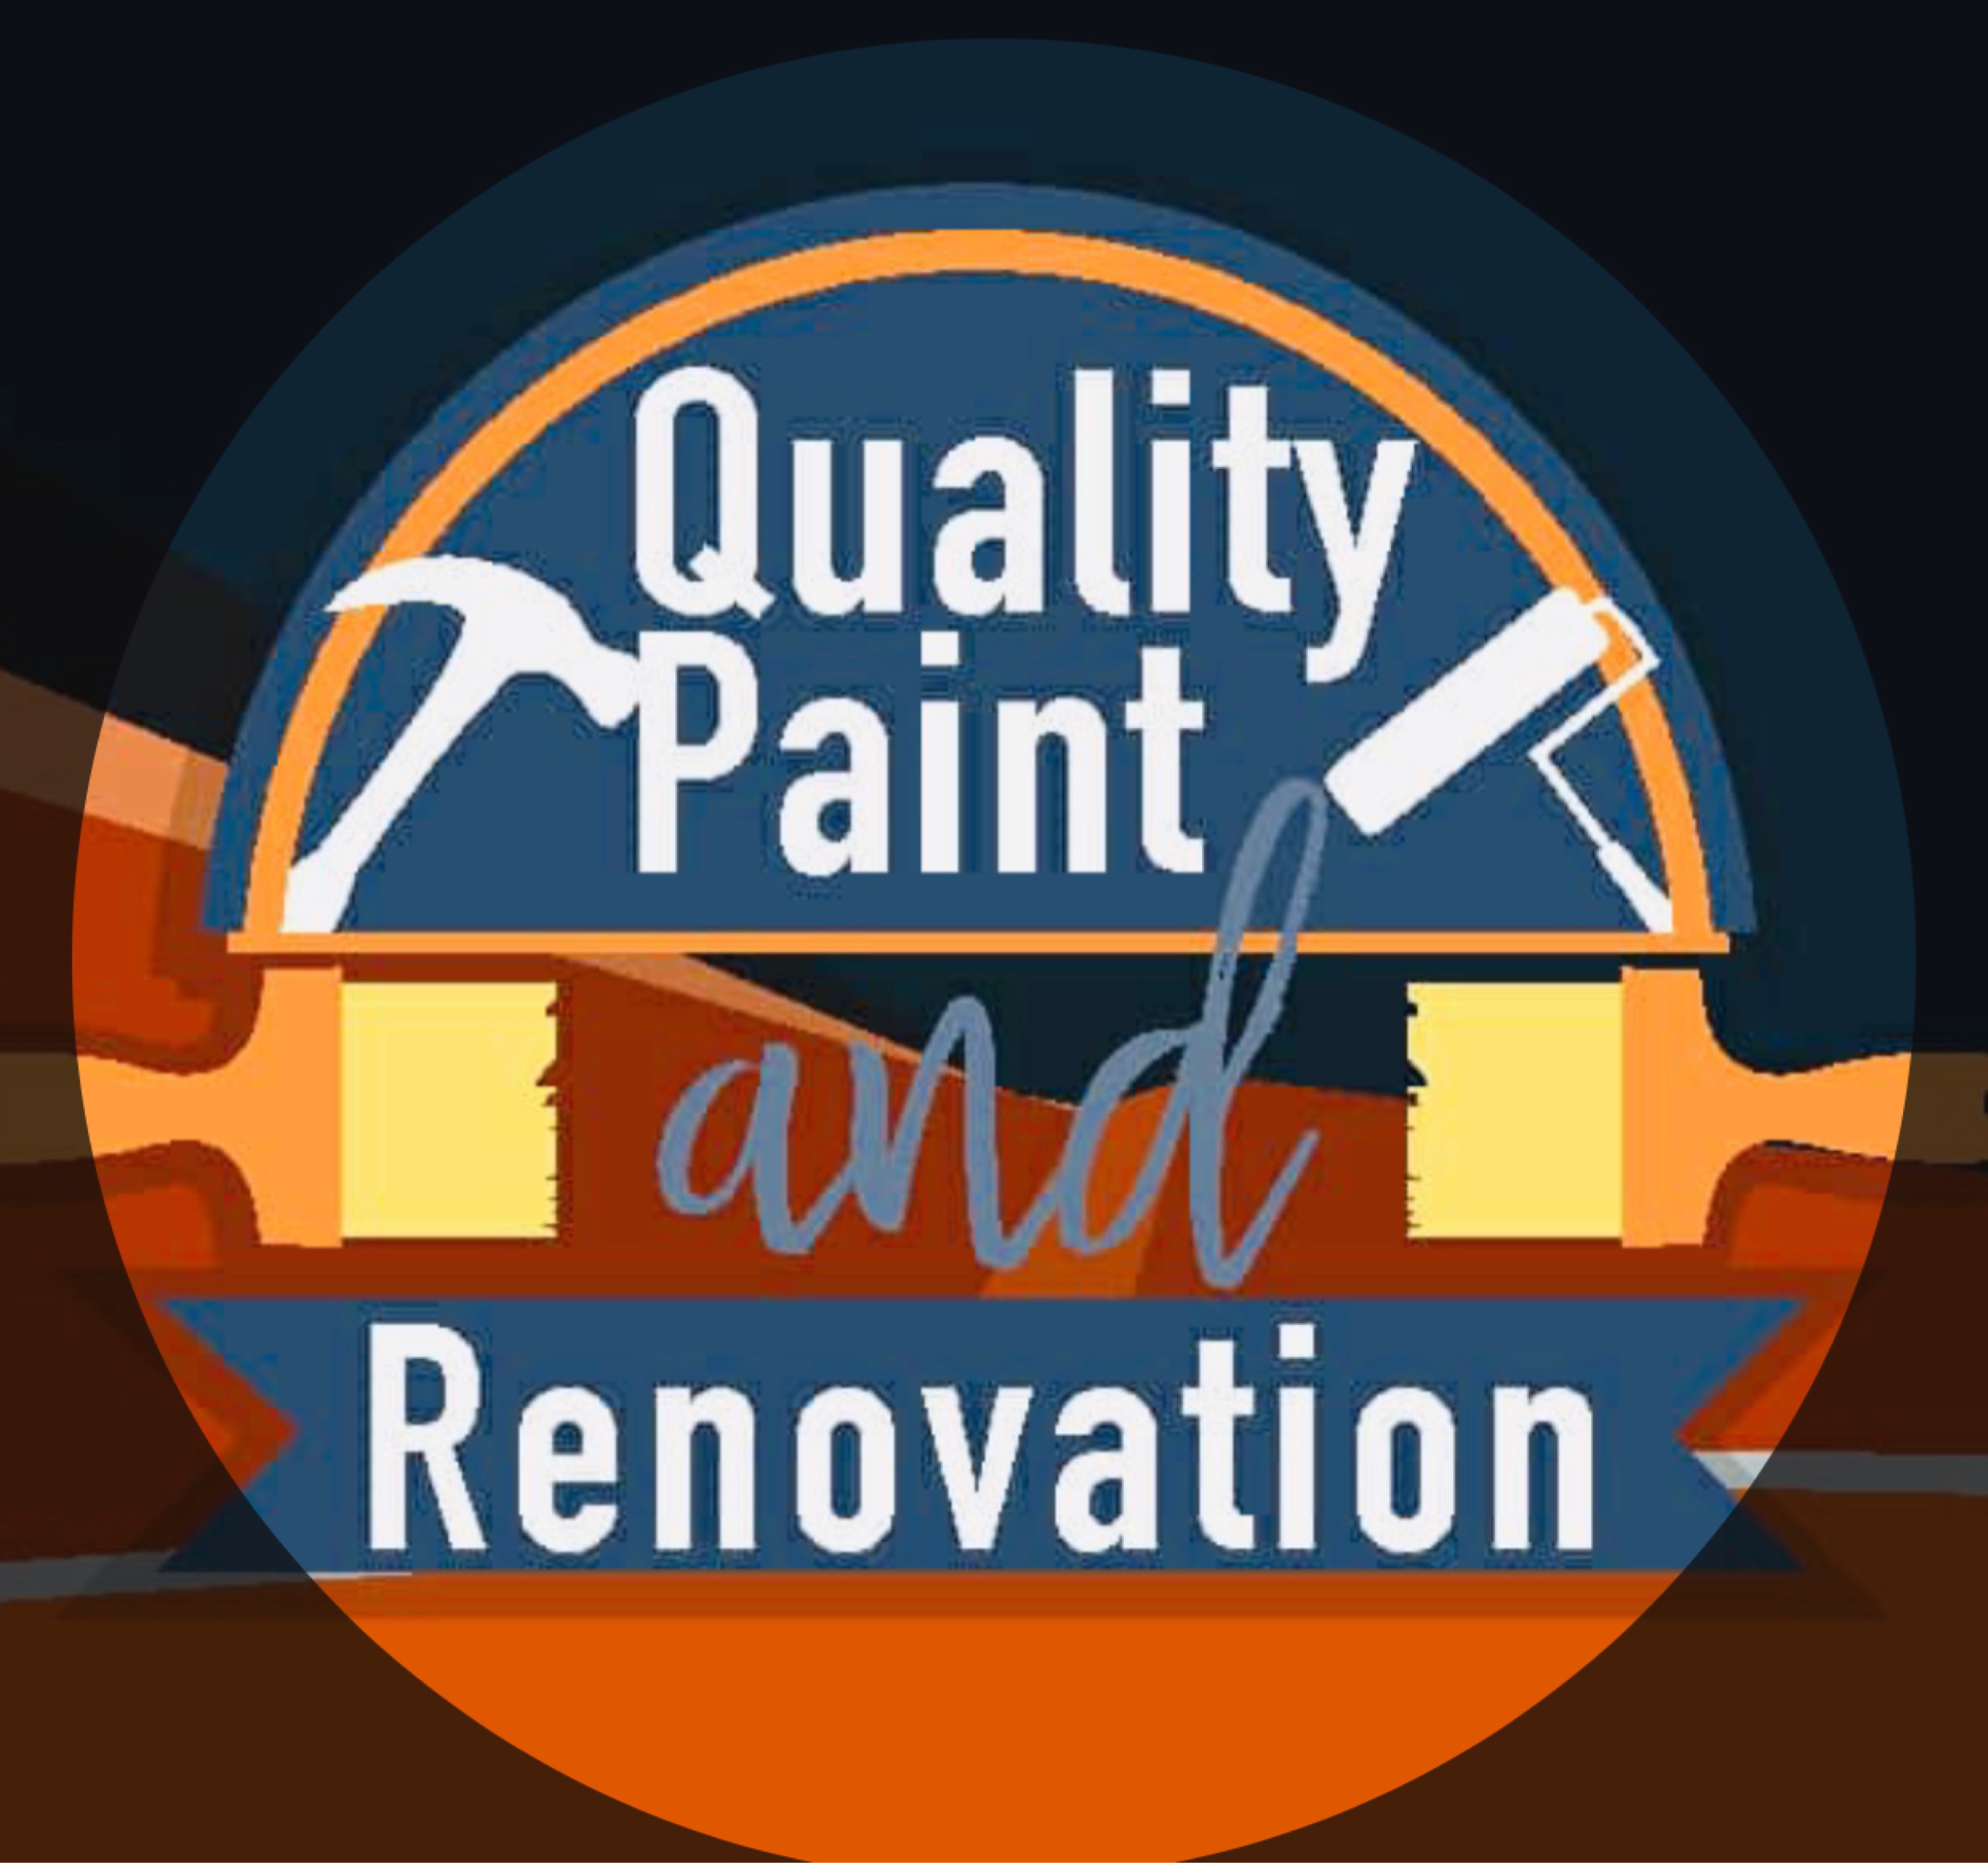 Quality Paint and Renovation Logo